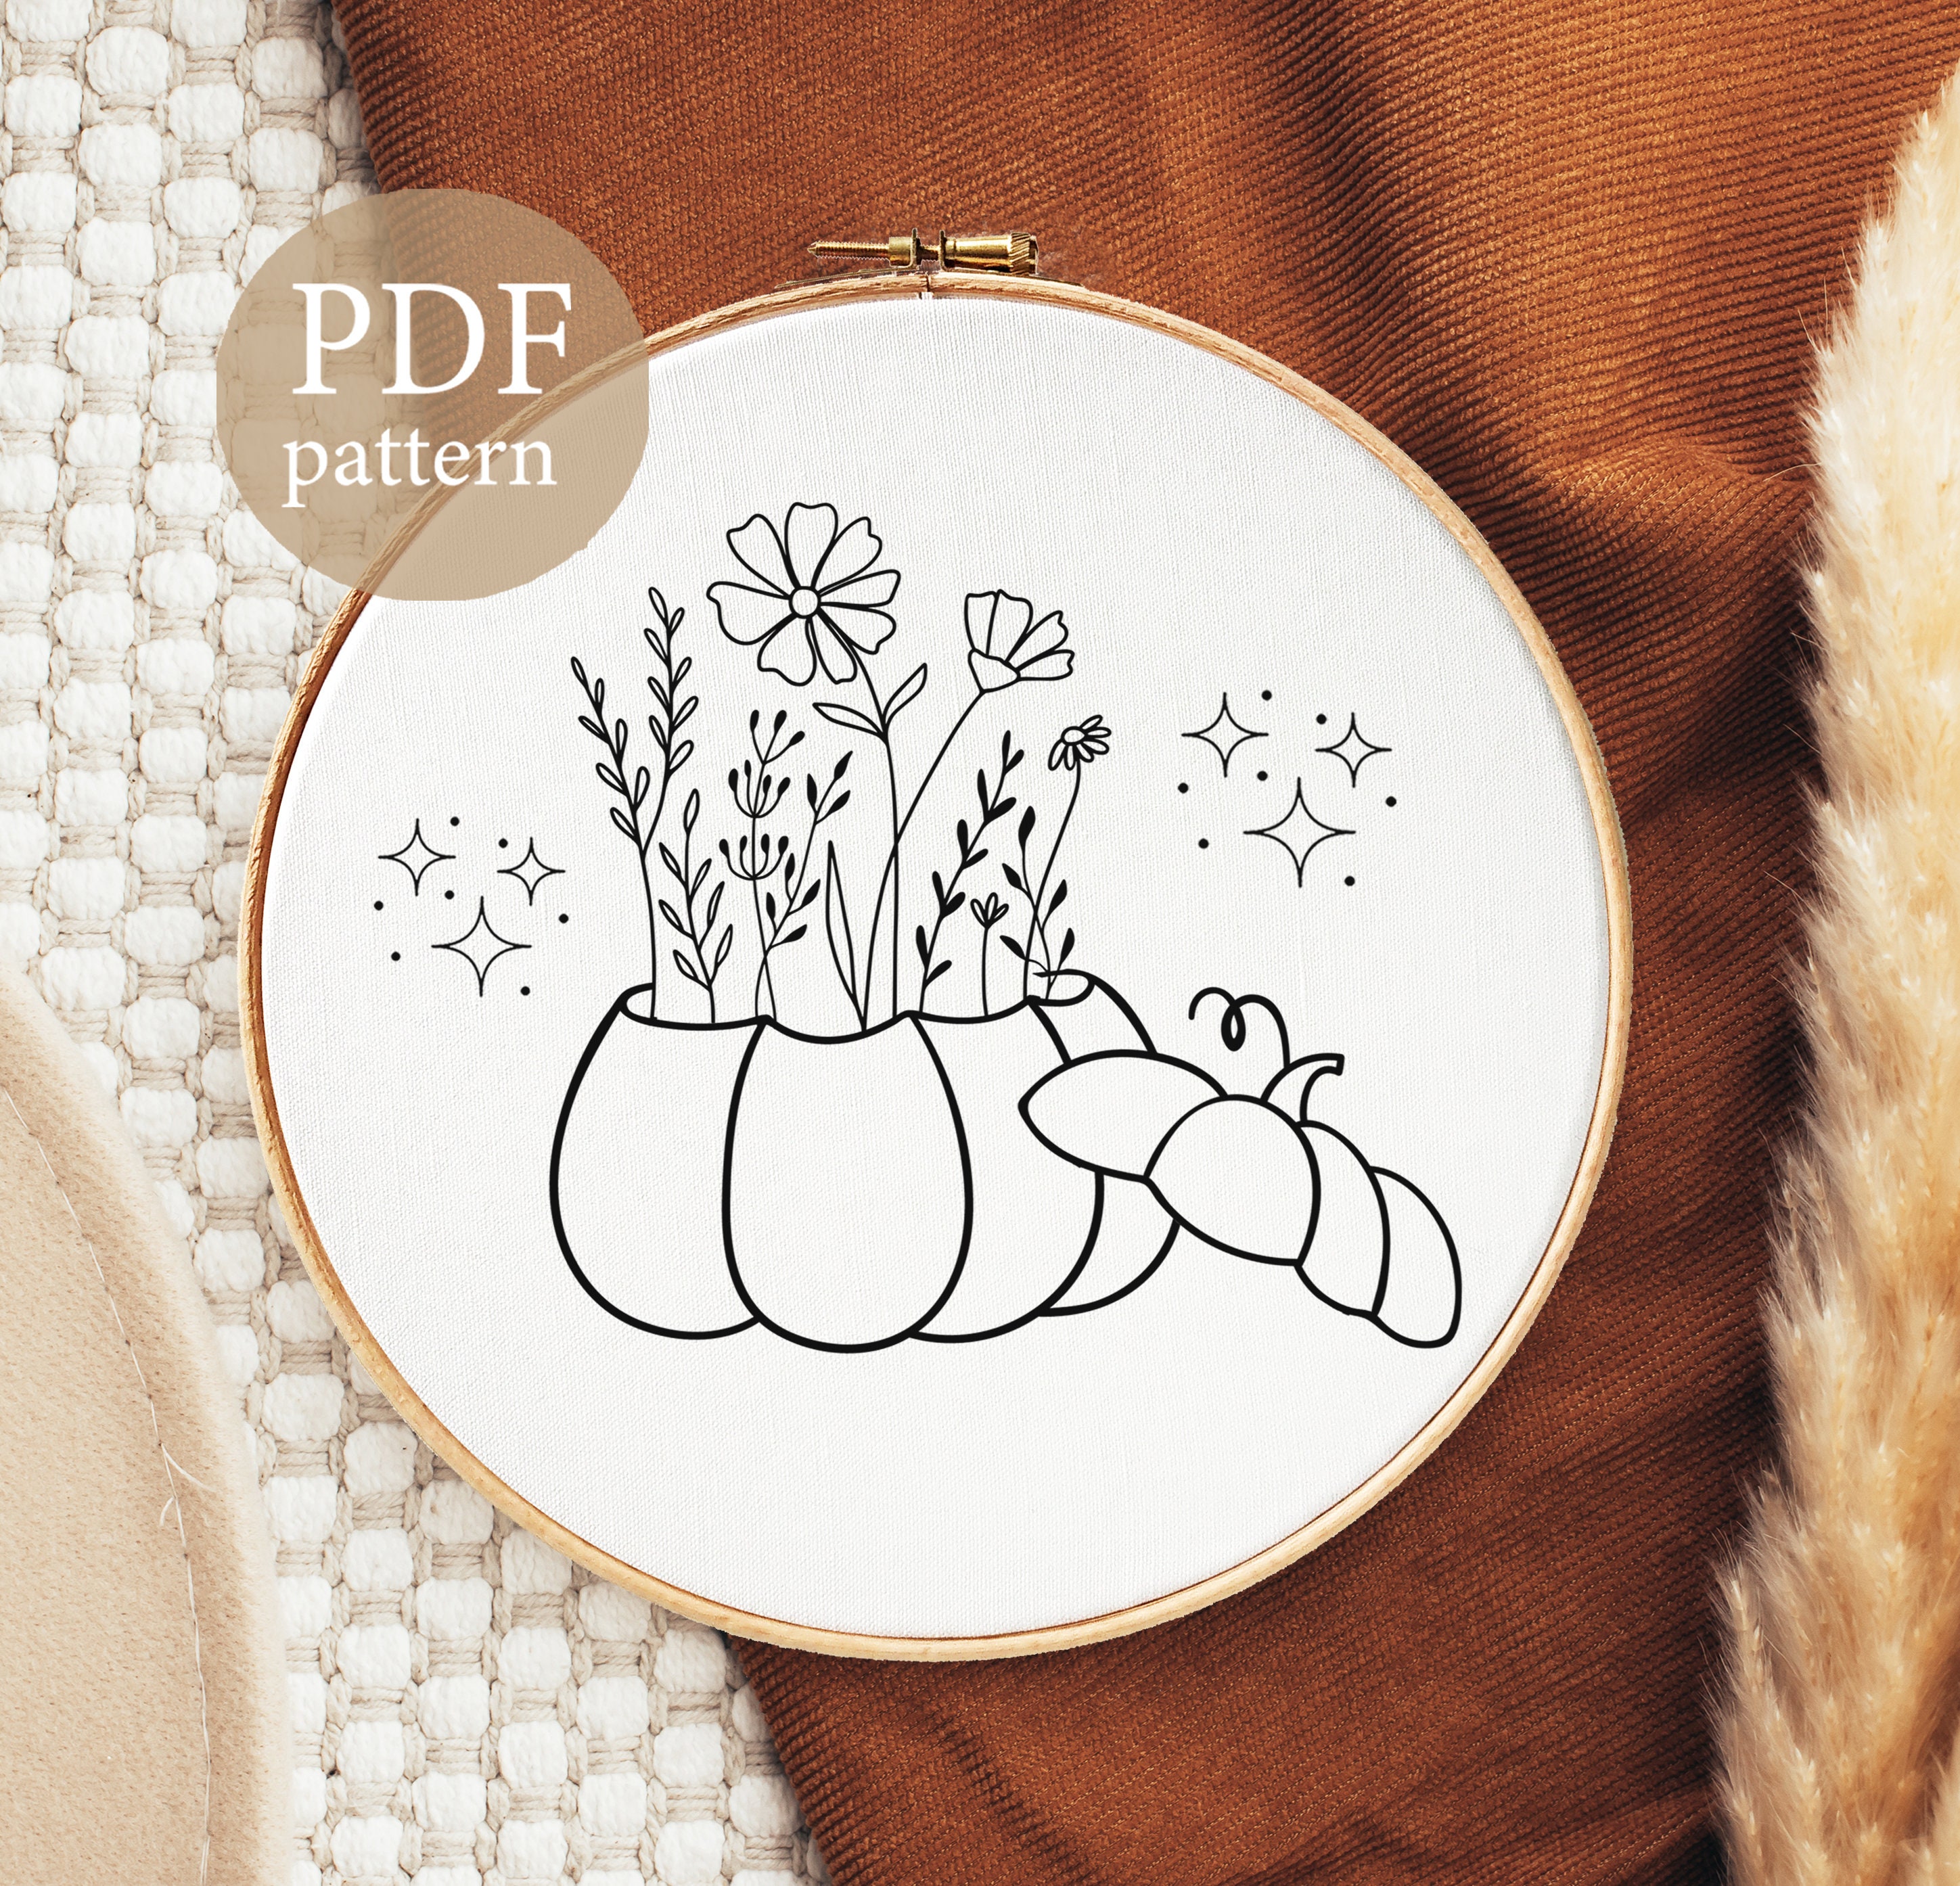 Halloween Pattern for Embroidery, Pumpkin Embroidery Designs, Cozy